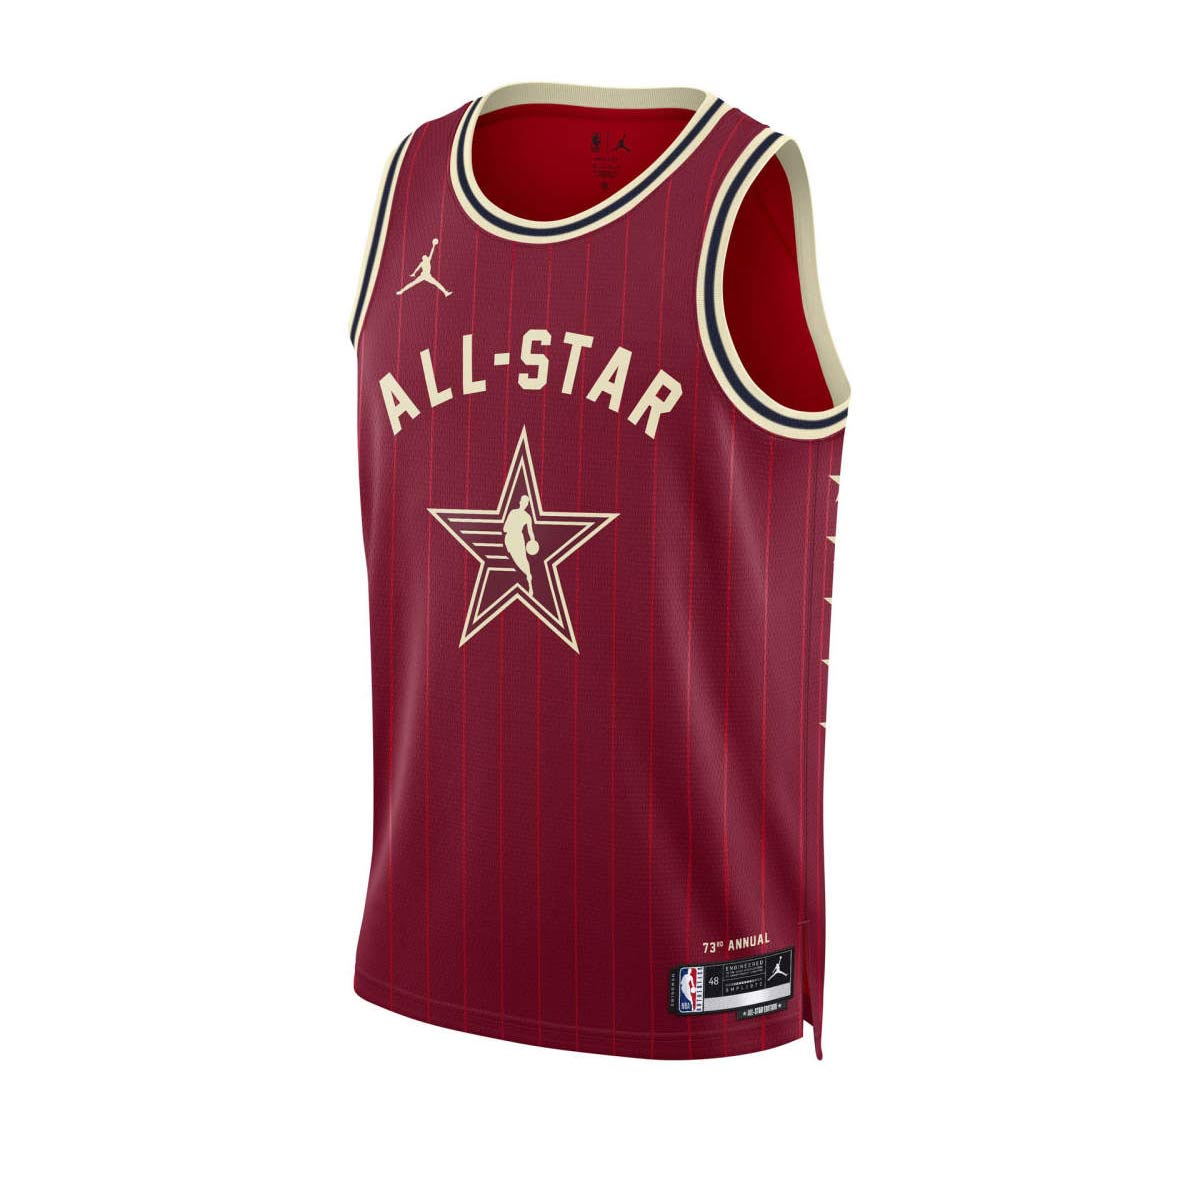 Asw Mwmn Jersey T1 '24 - Durant